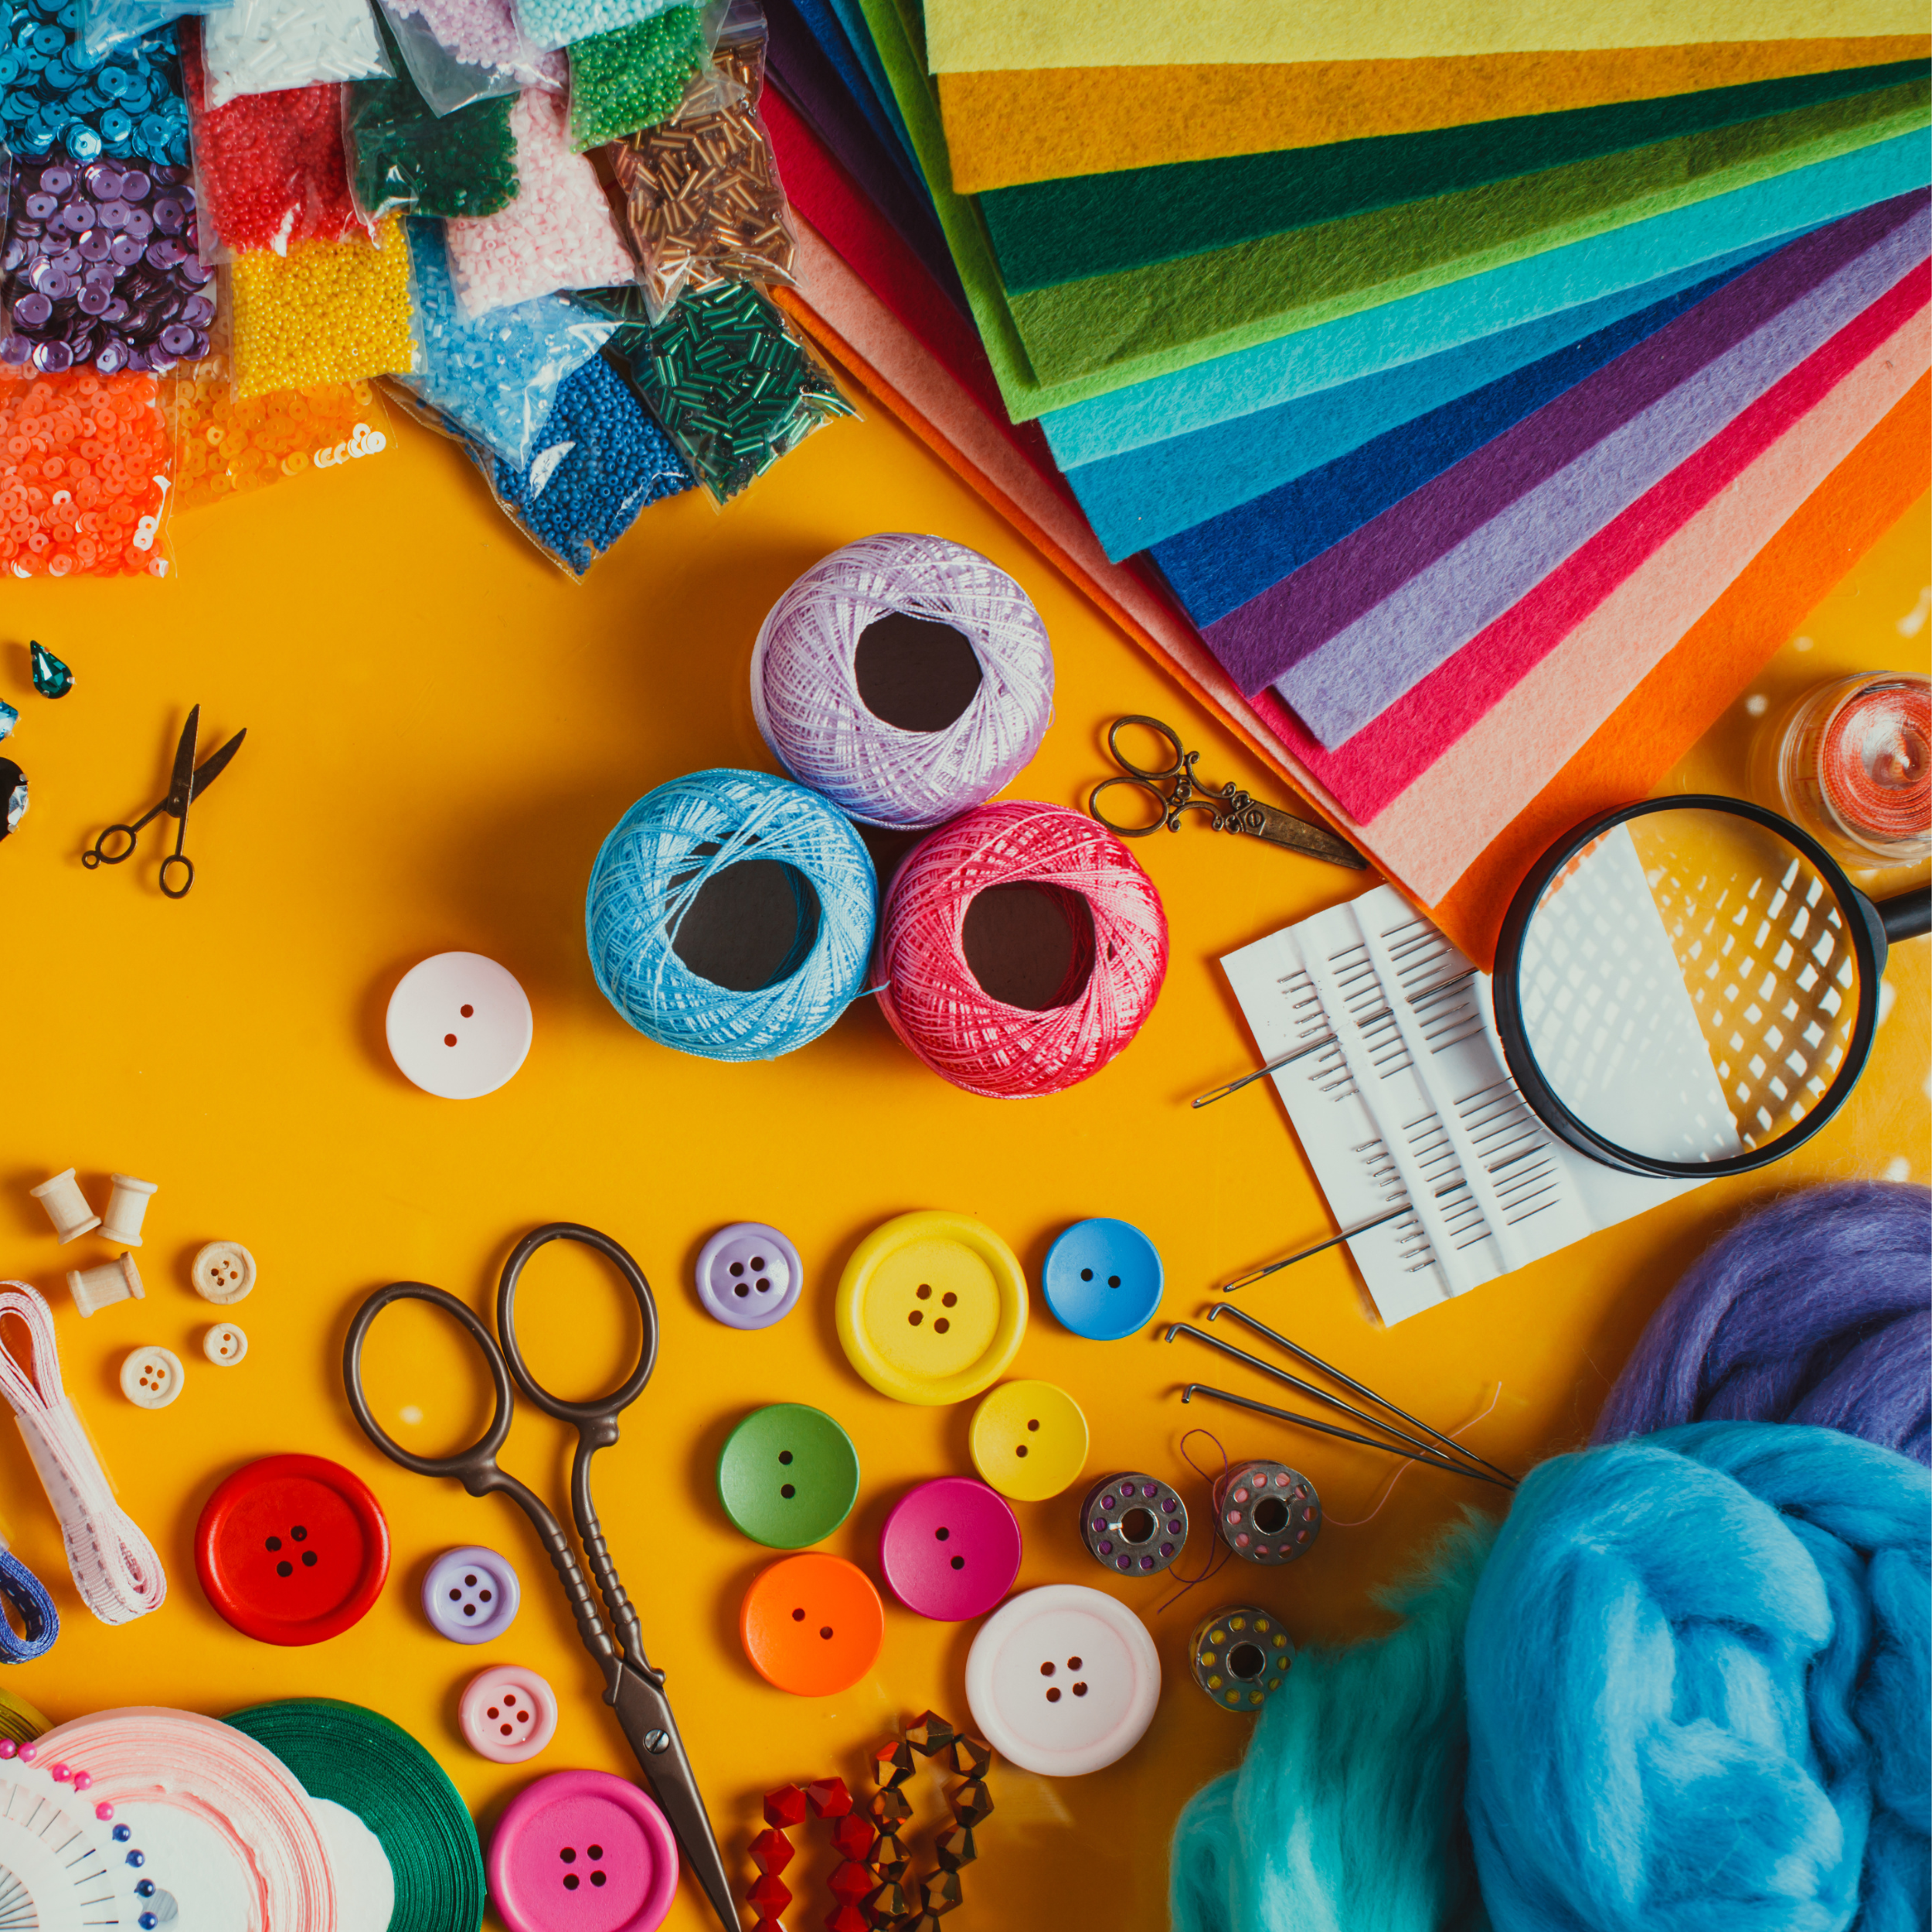 Arts & Crafts Default Image: Felt, Beads, Thread, Scissors, Magnifying Glass, Wool and other art & sewing supplies!